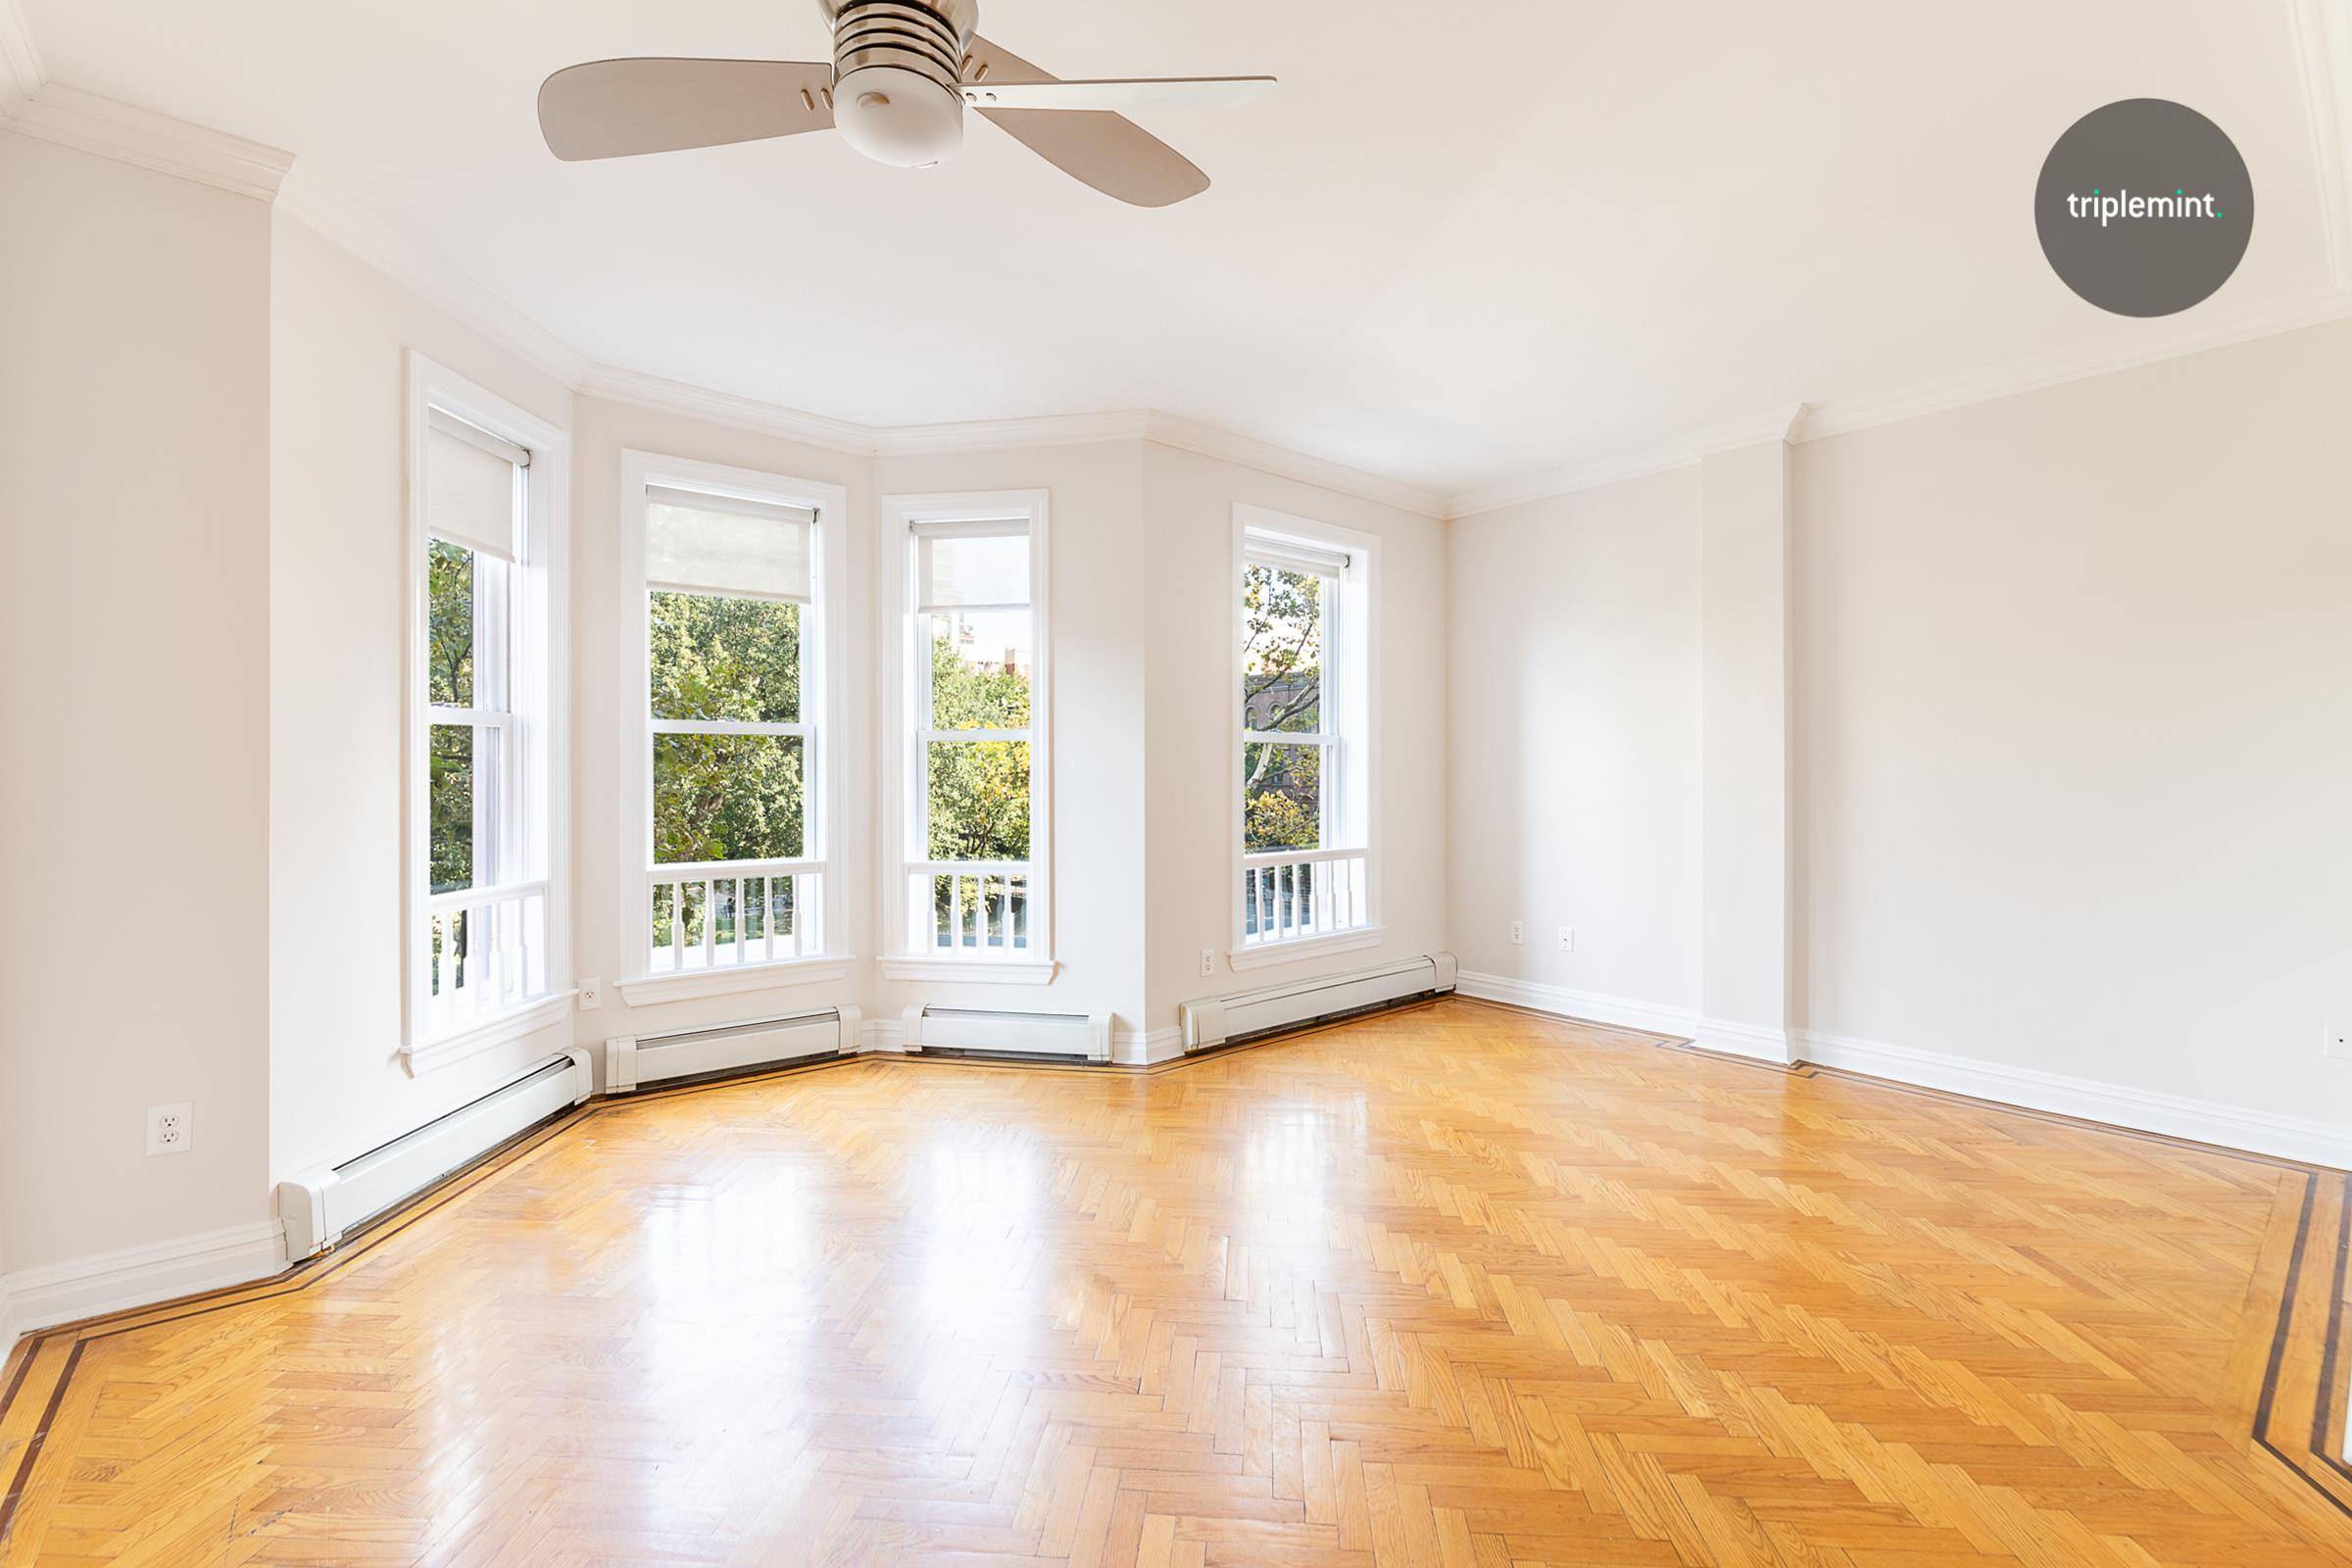 Enjoy direct park views from this rarely available, stunning three bedroom, two bath duplex condo located in a landmarked brownstone on one of the most beautiful blocks in New York.